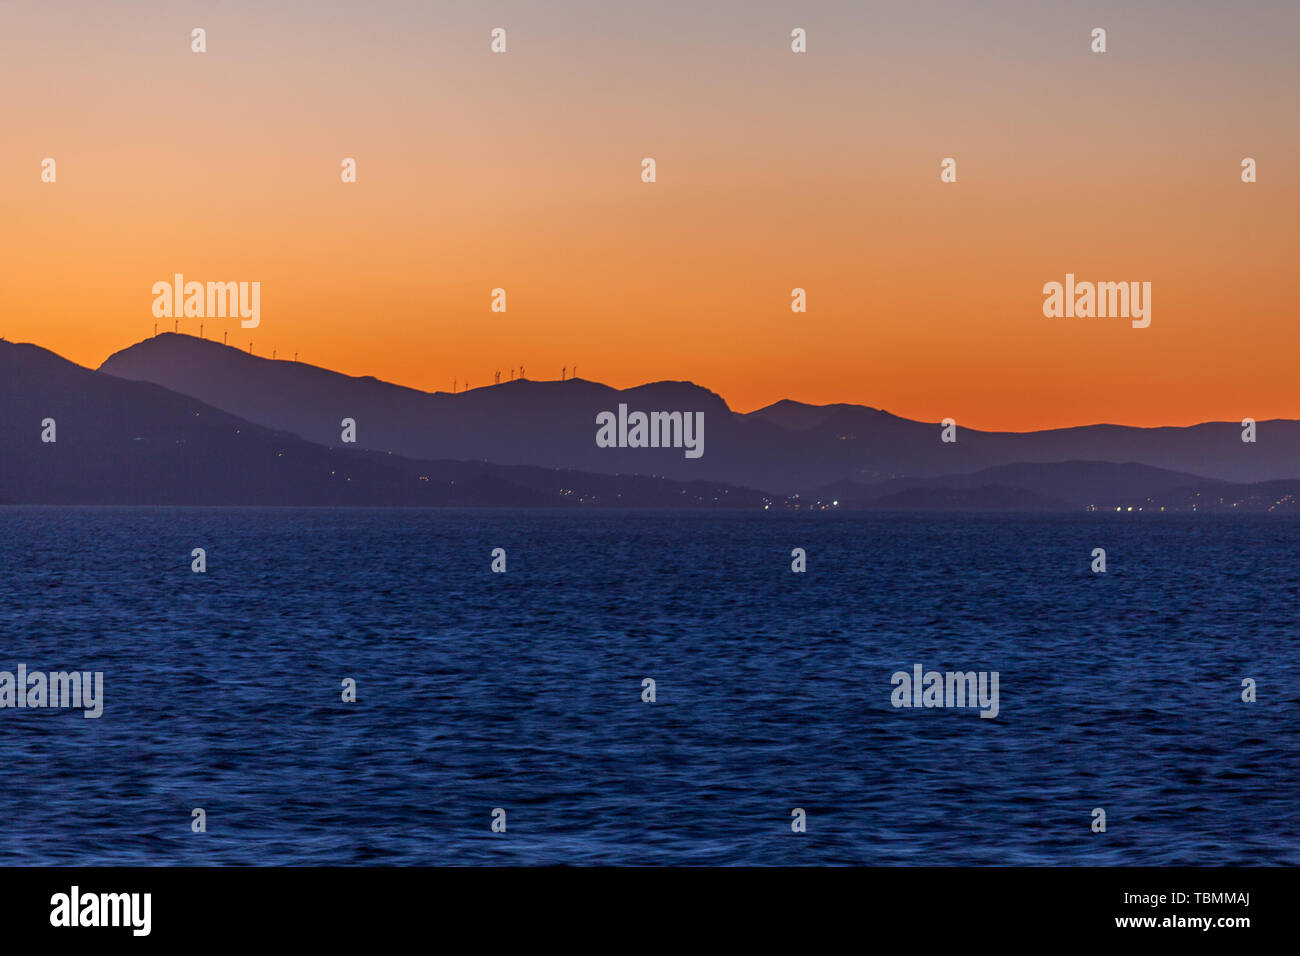 Aegean Sea islands silhouette with wind turbines at sunset Stock Photo